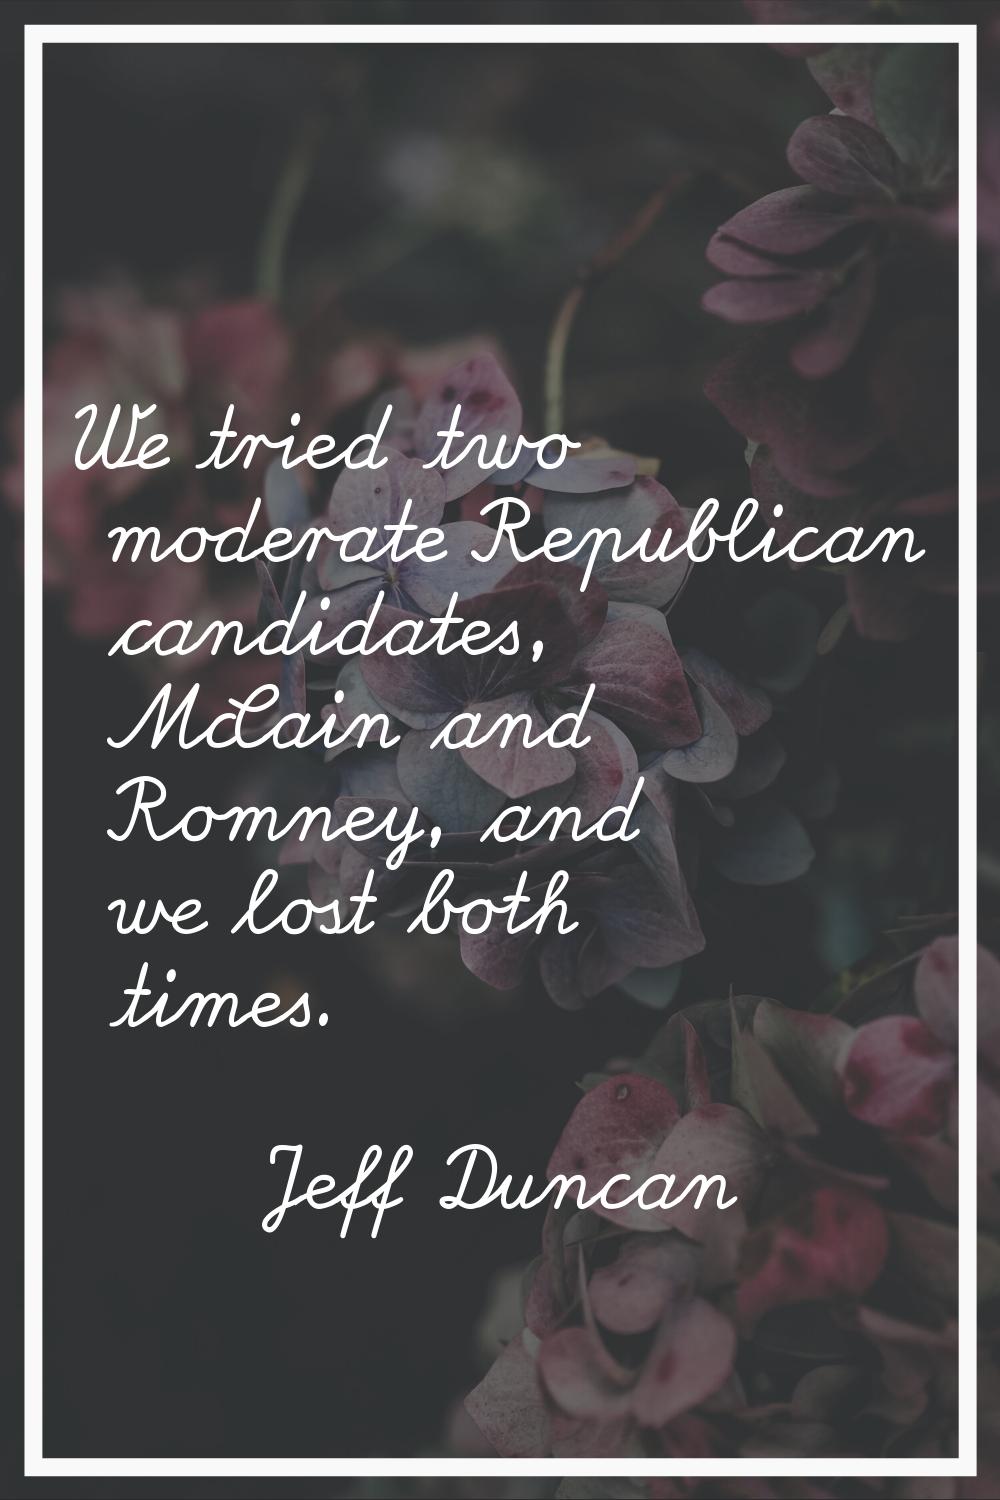 We tried two moderate Republican candidates, McCain and Romney, and we lost both times.